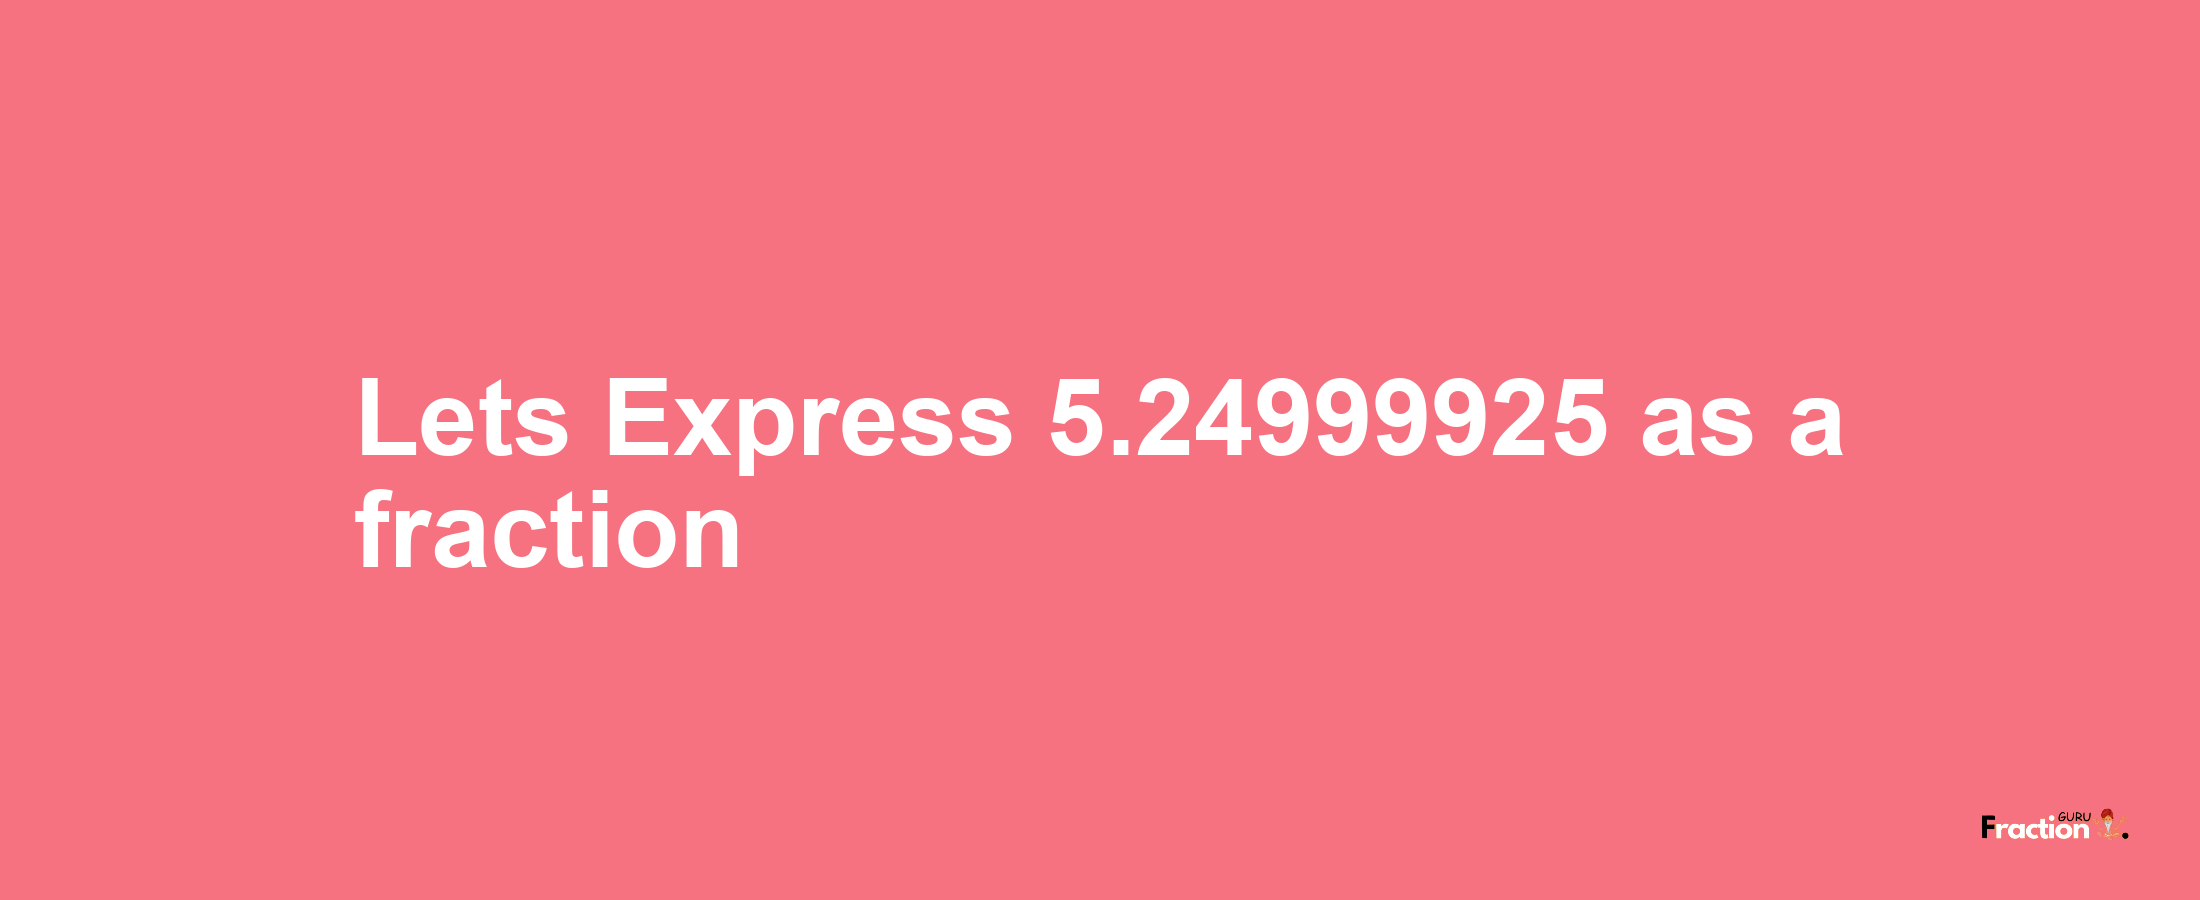 Lets Express 5.24999925 as afraction